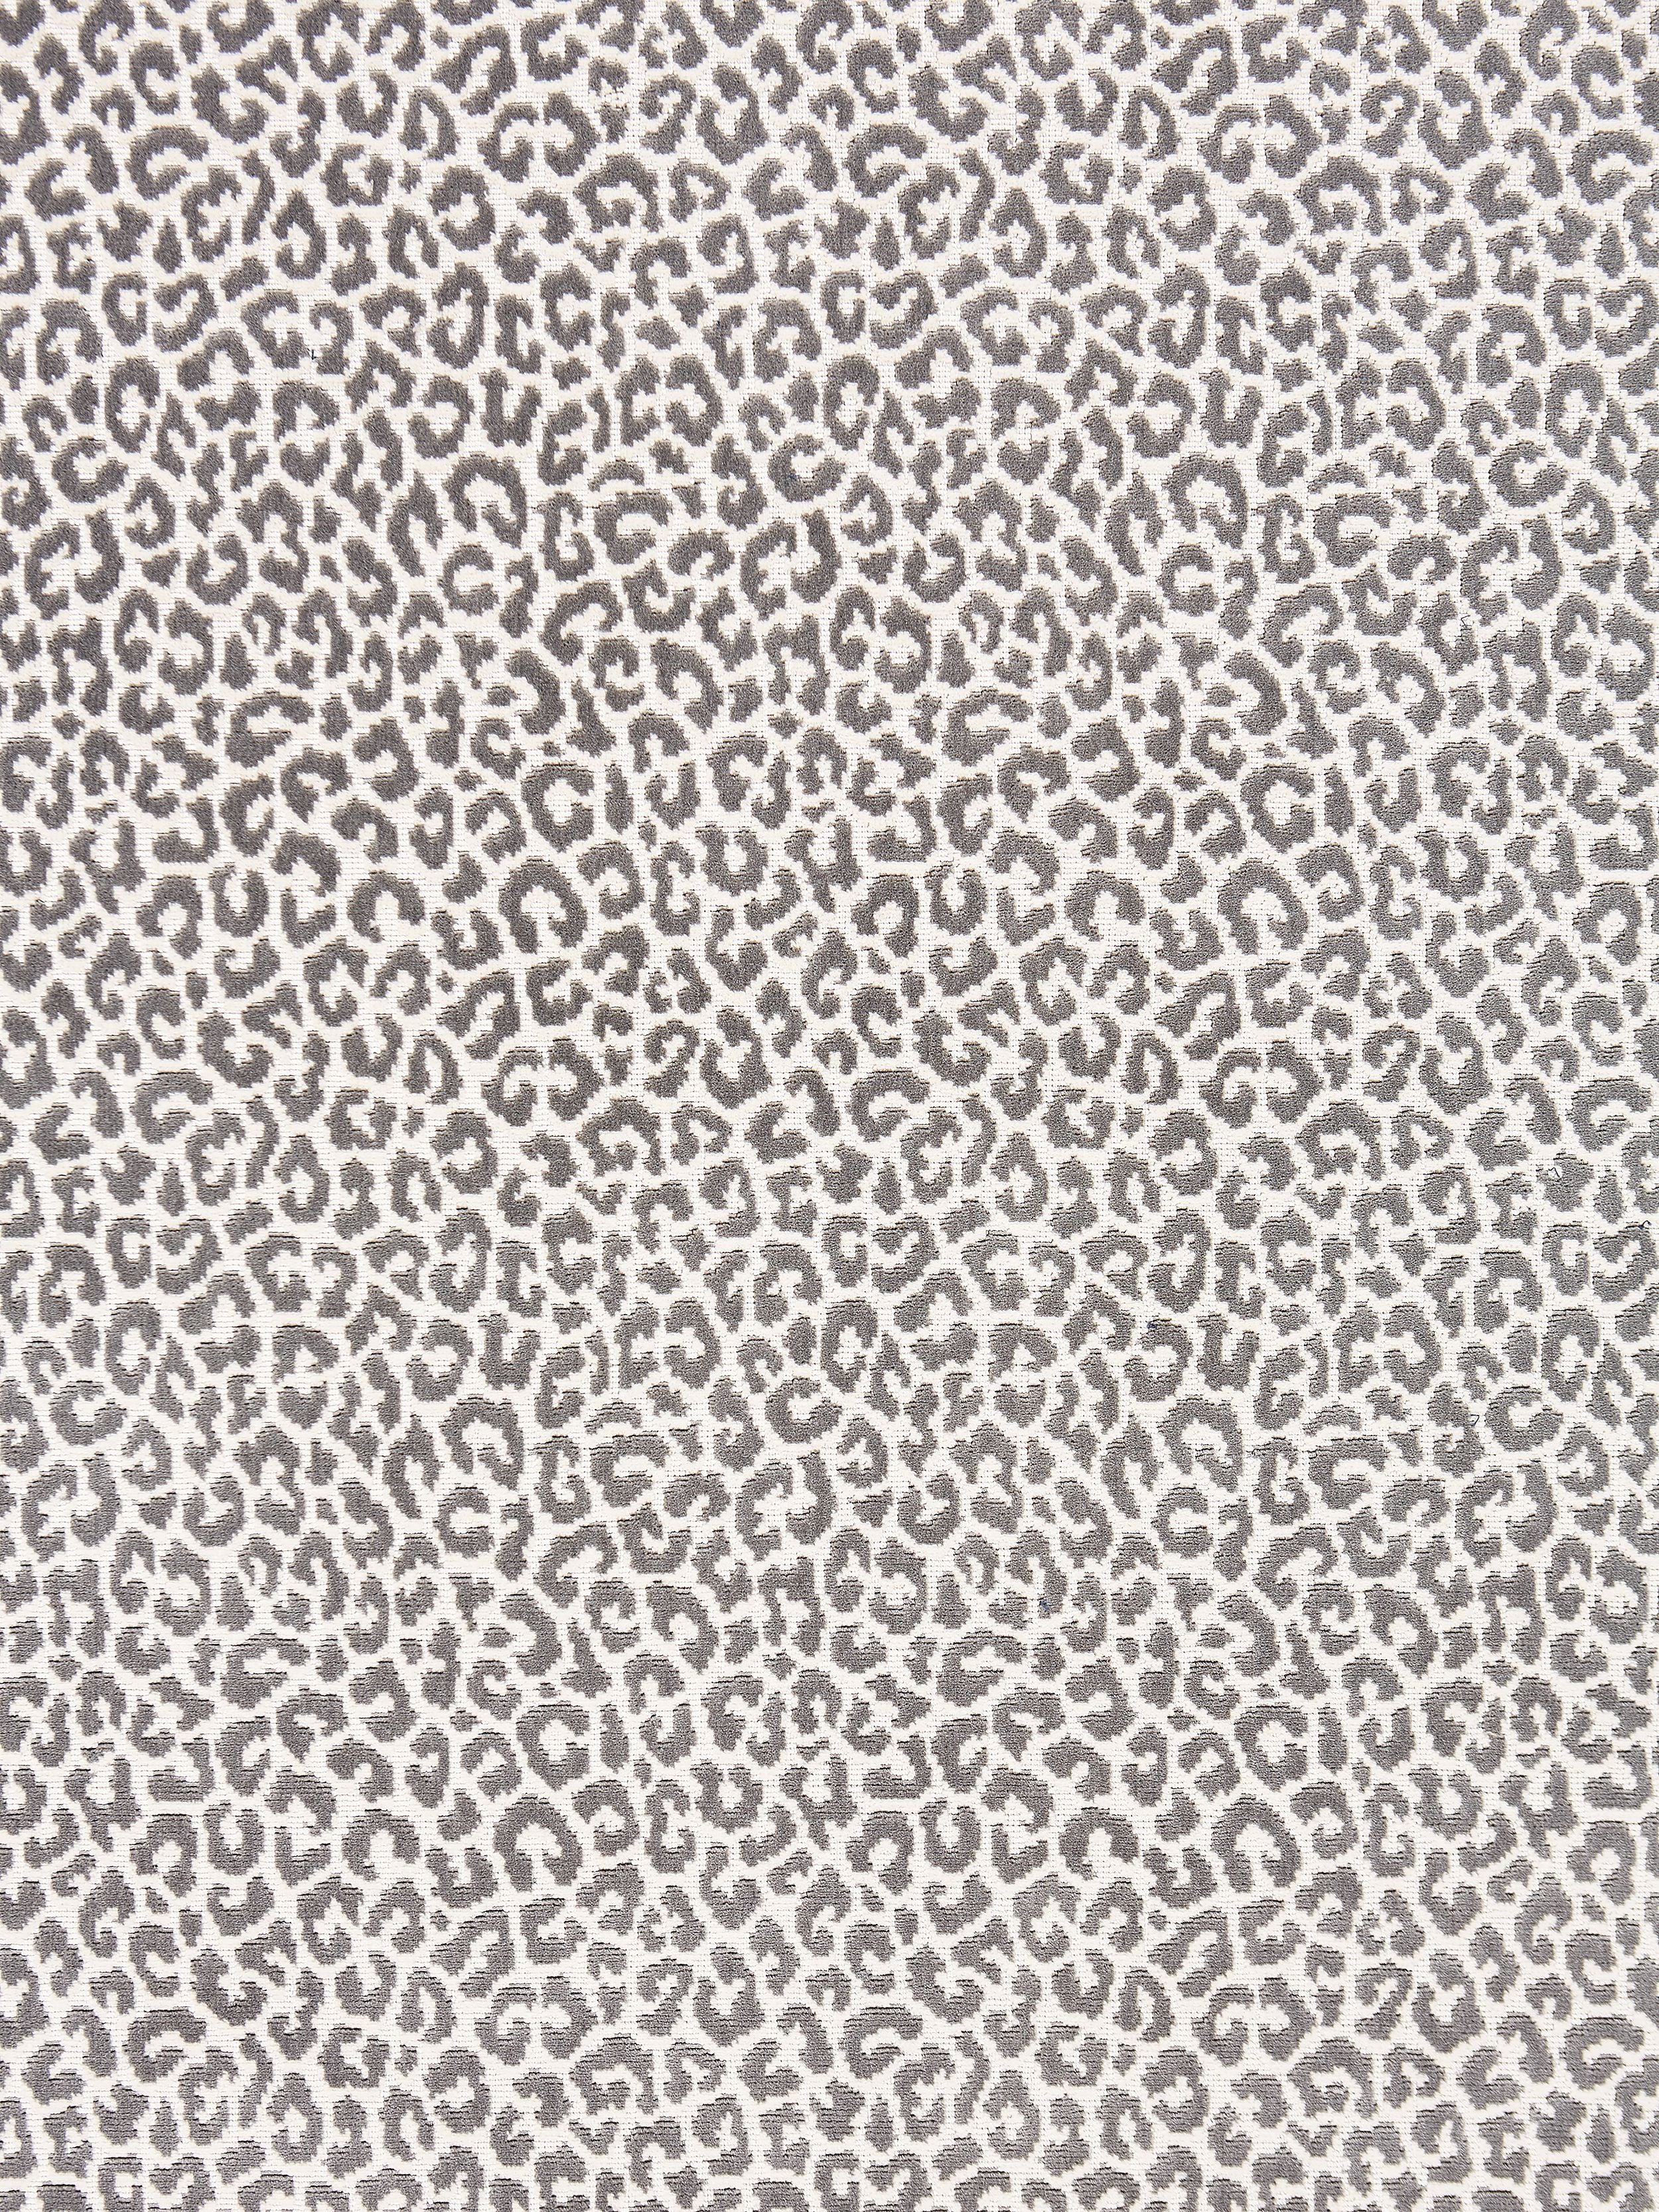 Panthera Velvet fabric in smoke color - pattern number SC 000227037 - by Scalamandre in the Scalamandre Fabrics Book 1 collection